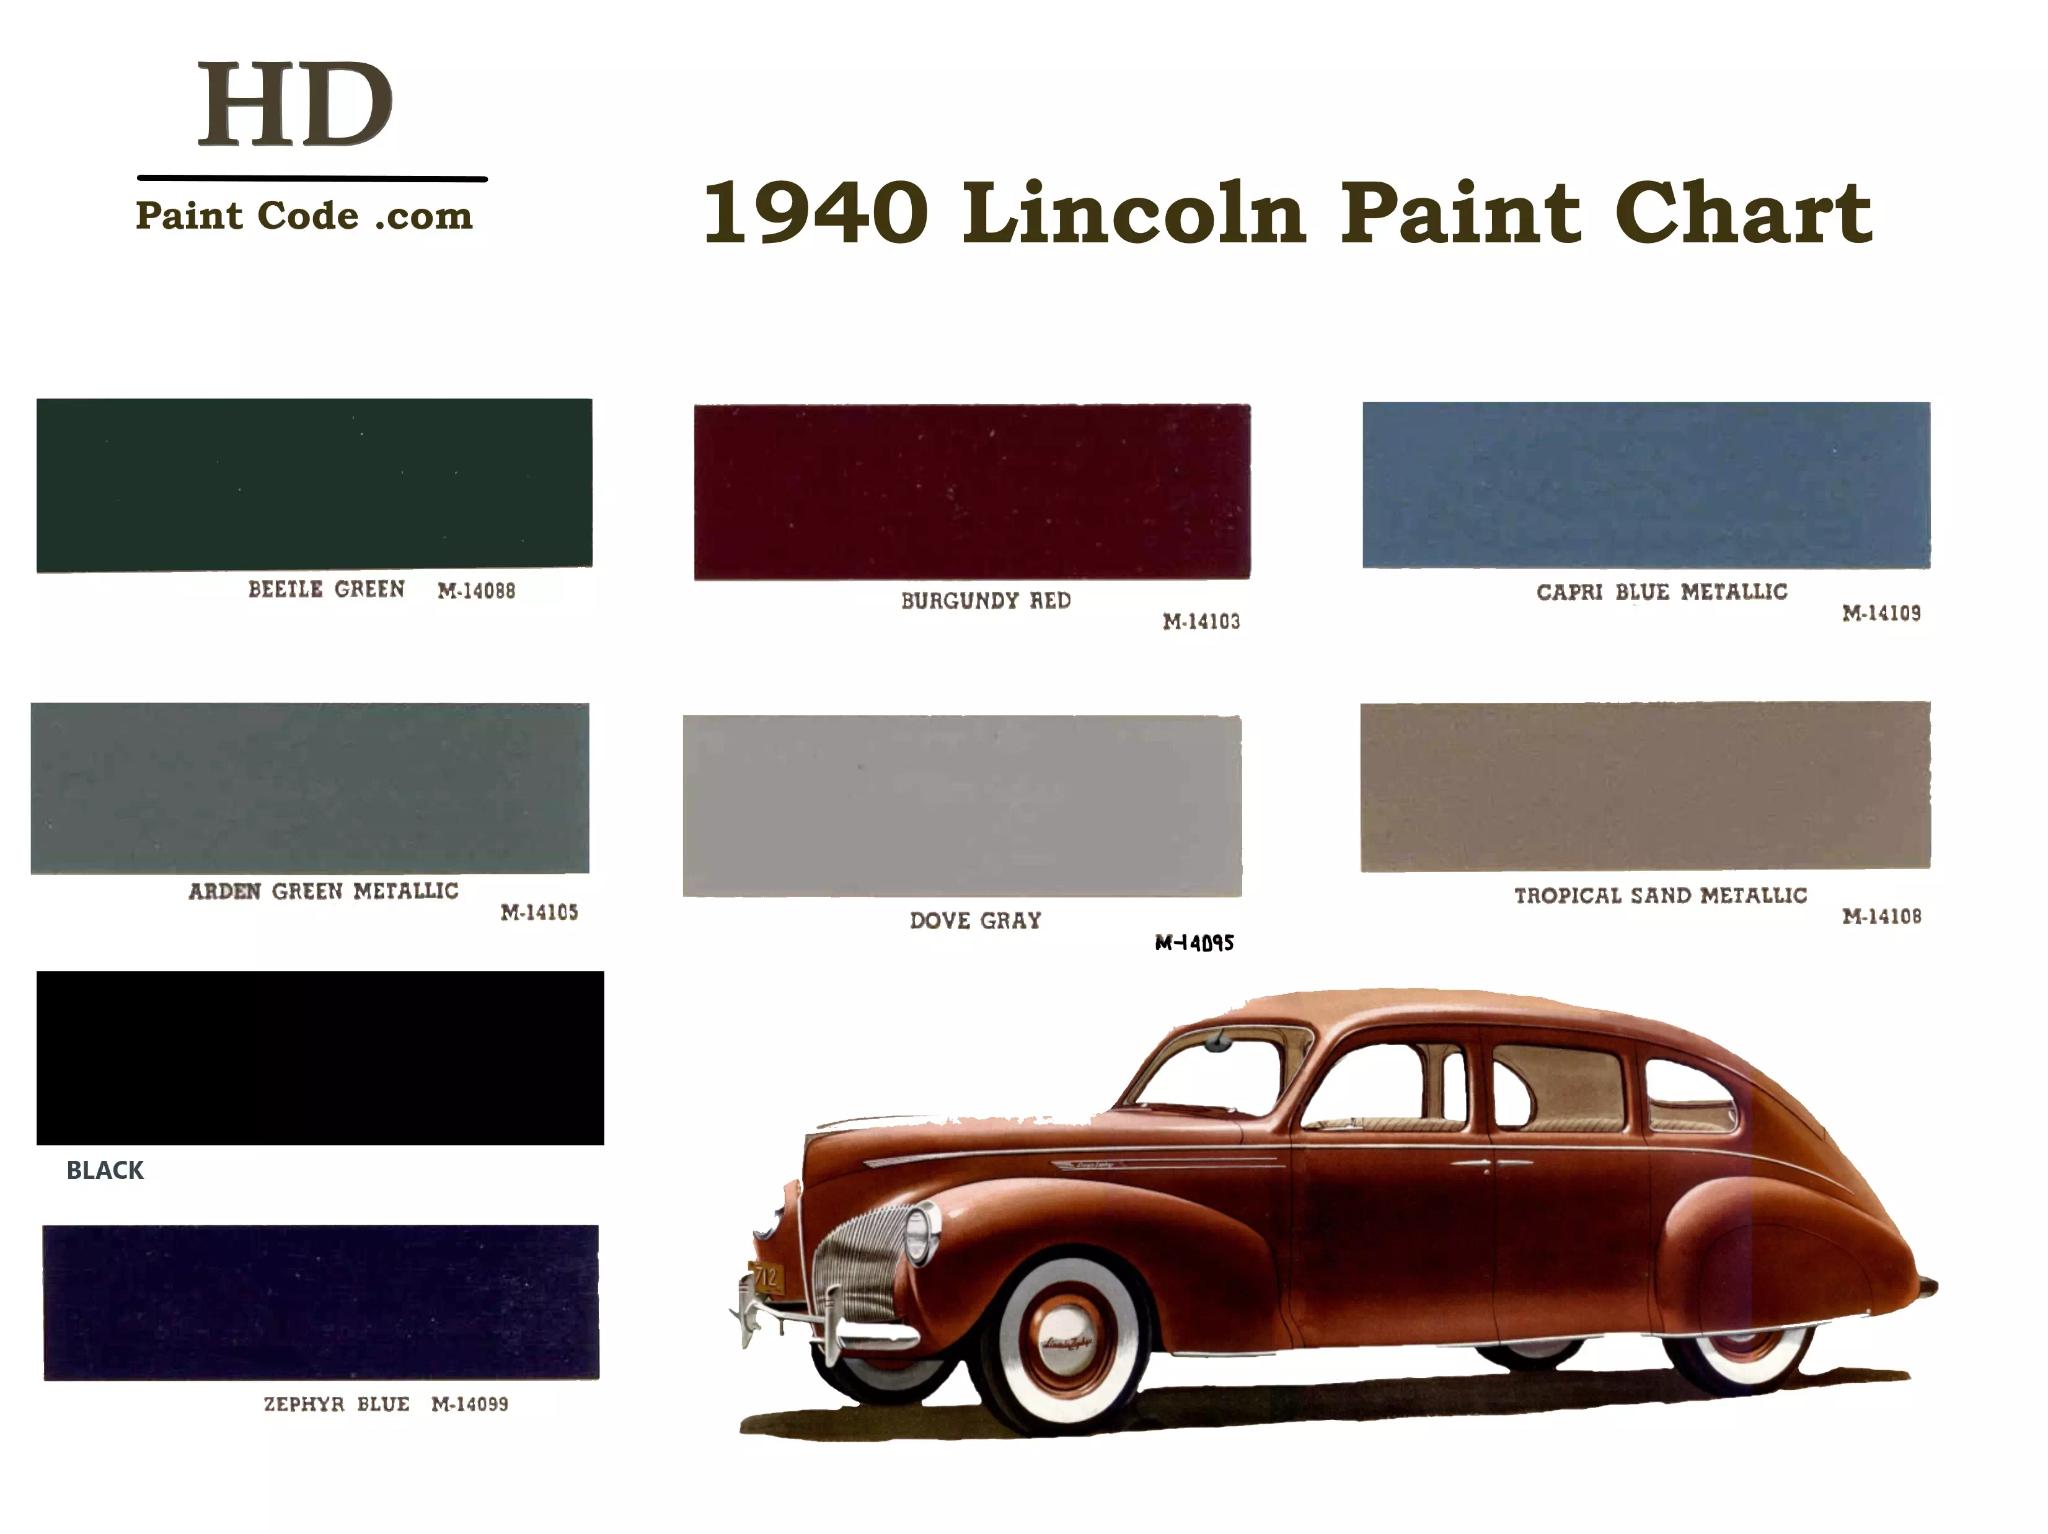 Paint Codes and colors used on all Lincoln Exterior Vehicles in 1940